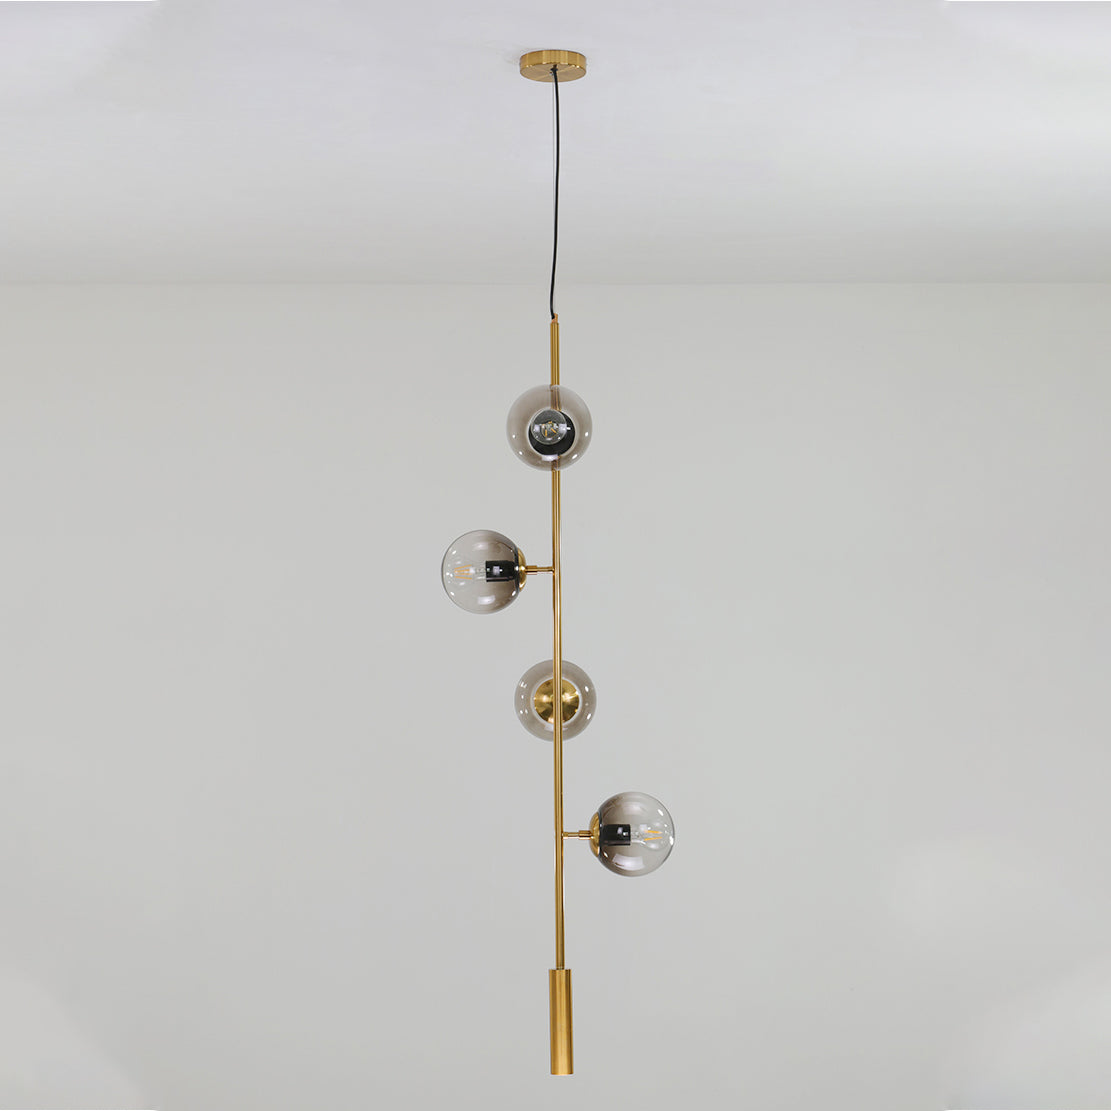 Olive Tree Branch 4 Bulb Staircase Void Brass Pendant Light